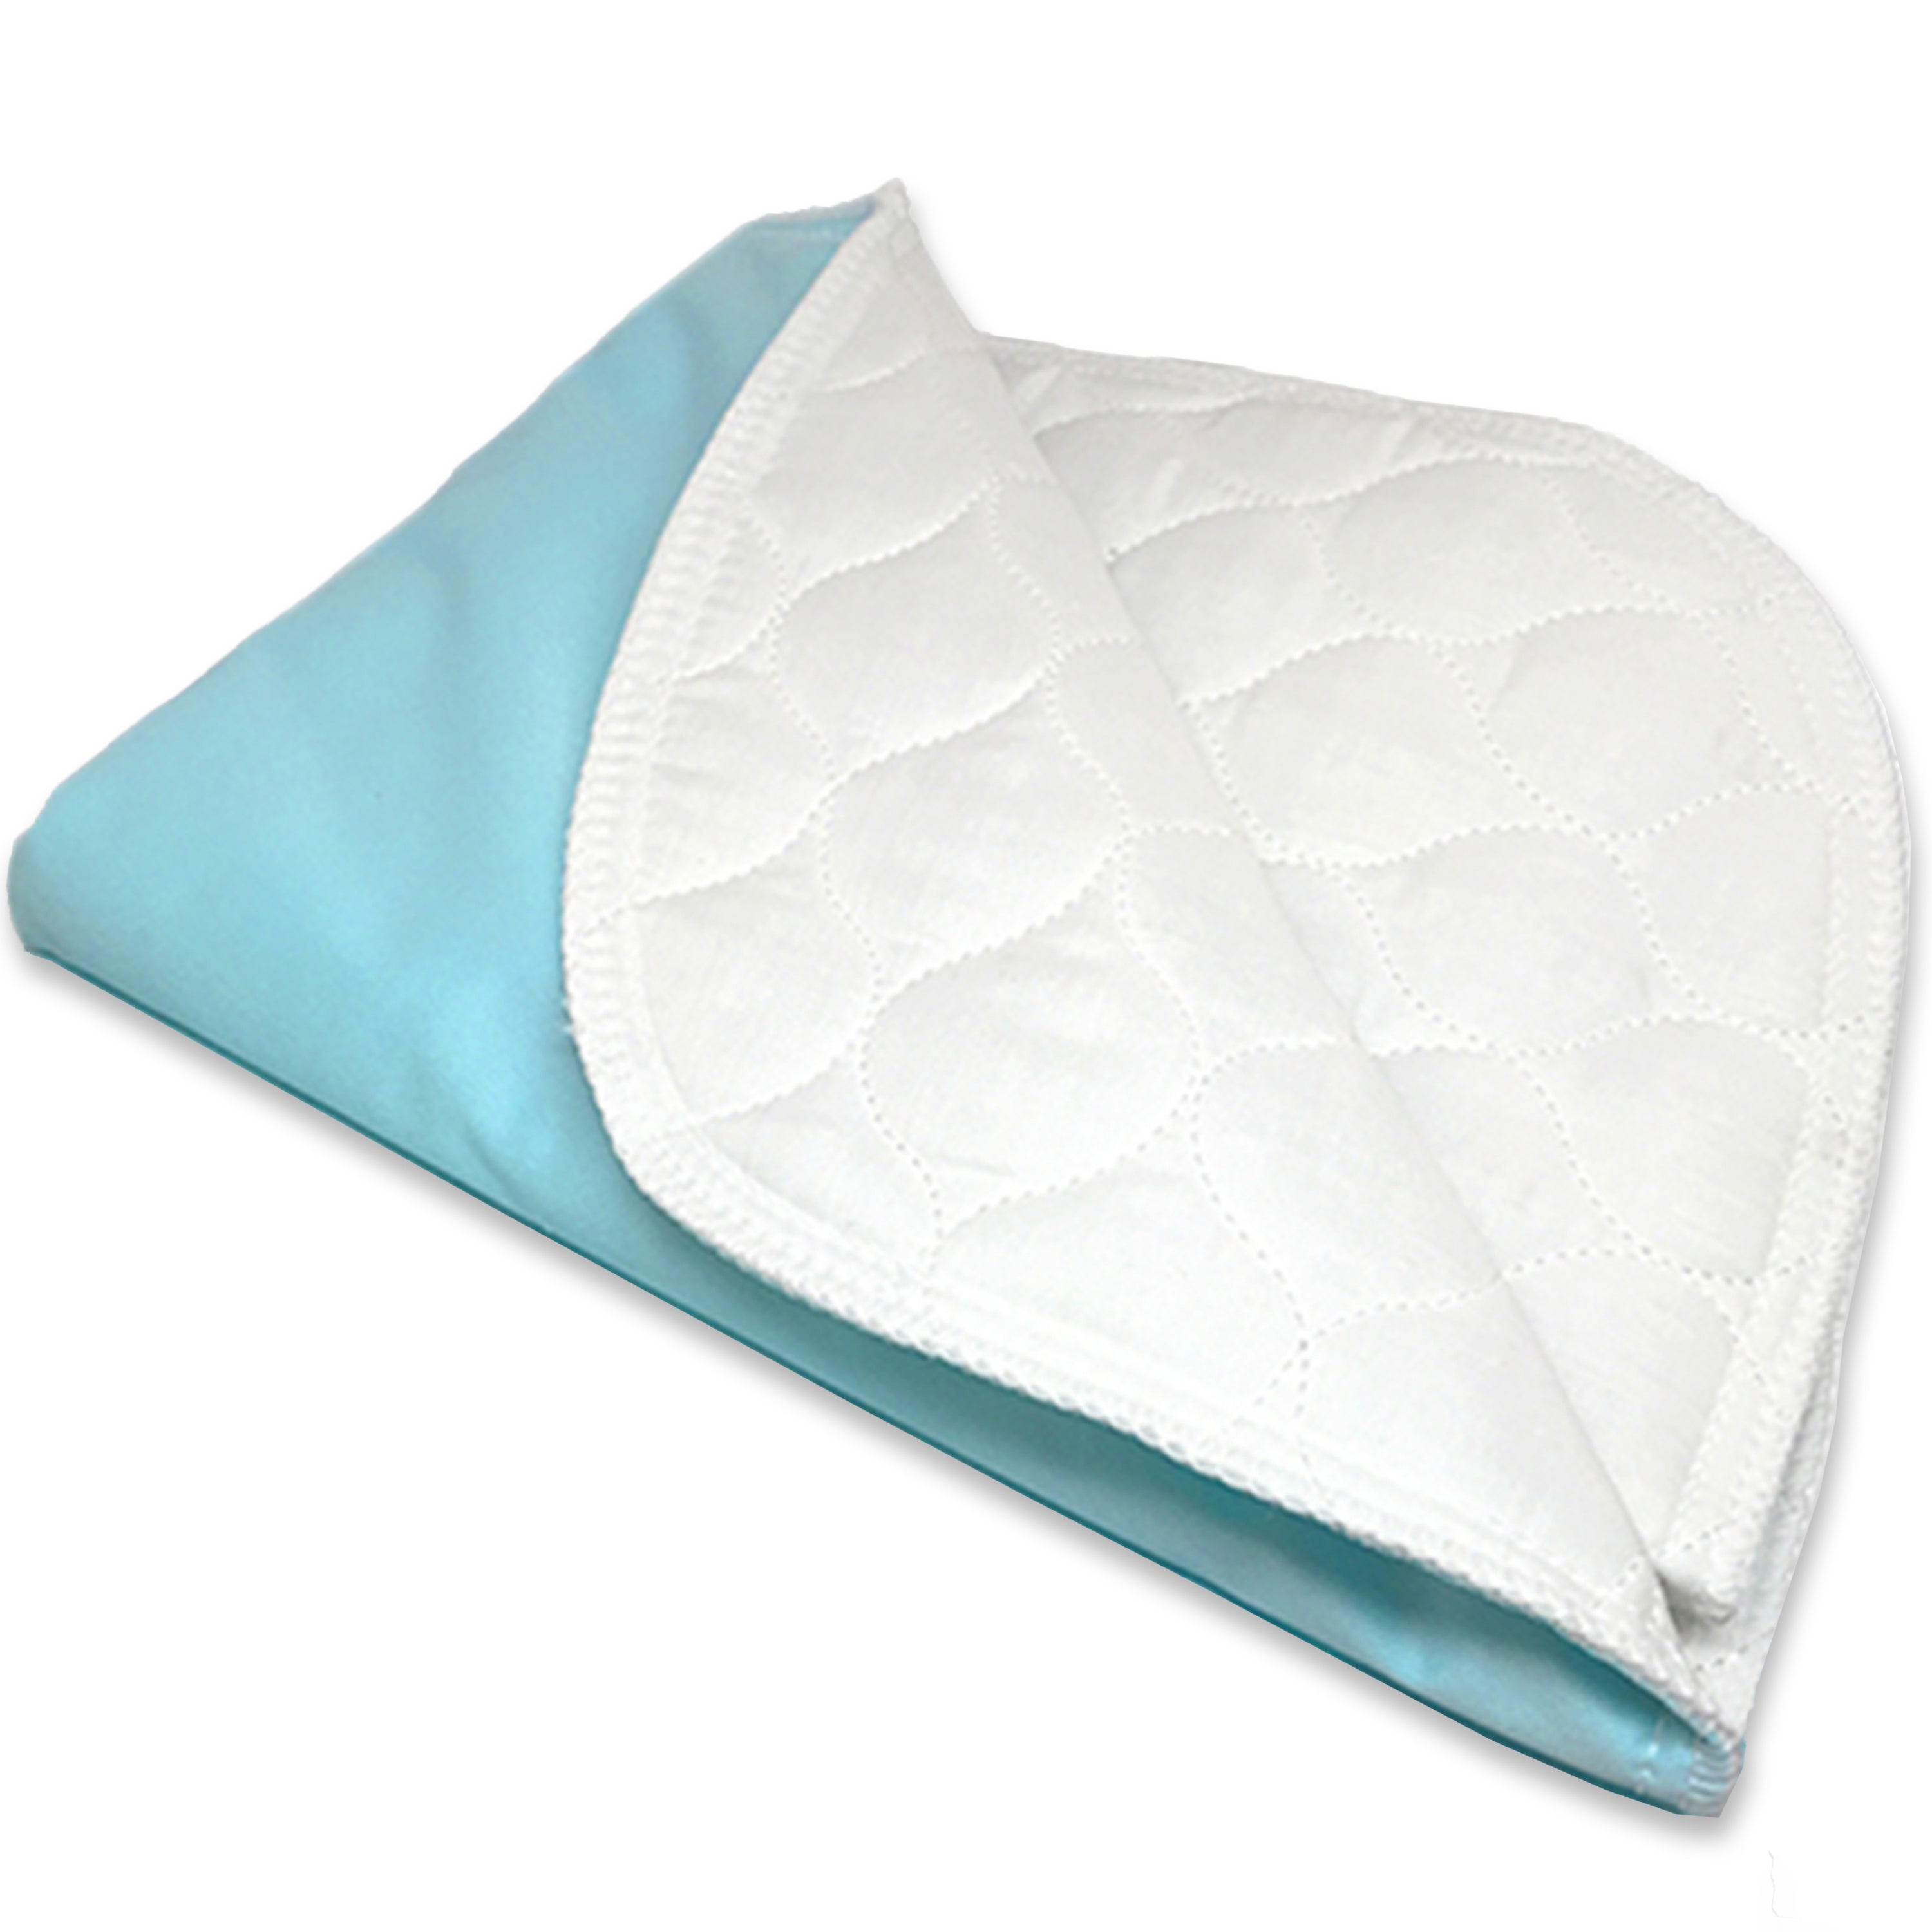 Washable Reusable Underpad Bed Pad Incontinence Kids Adult